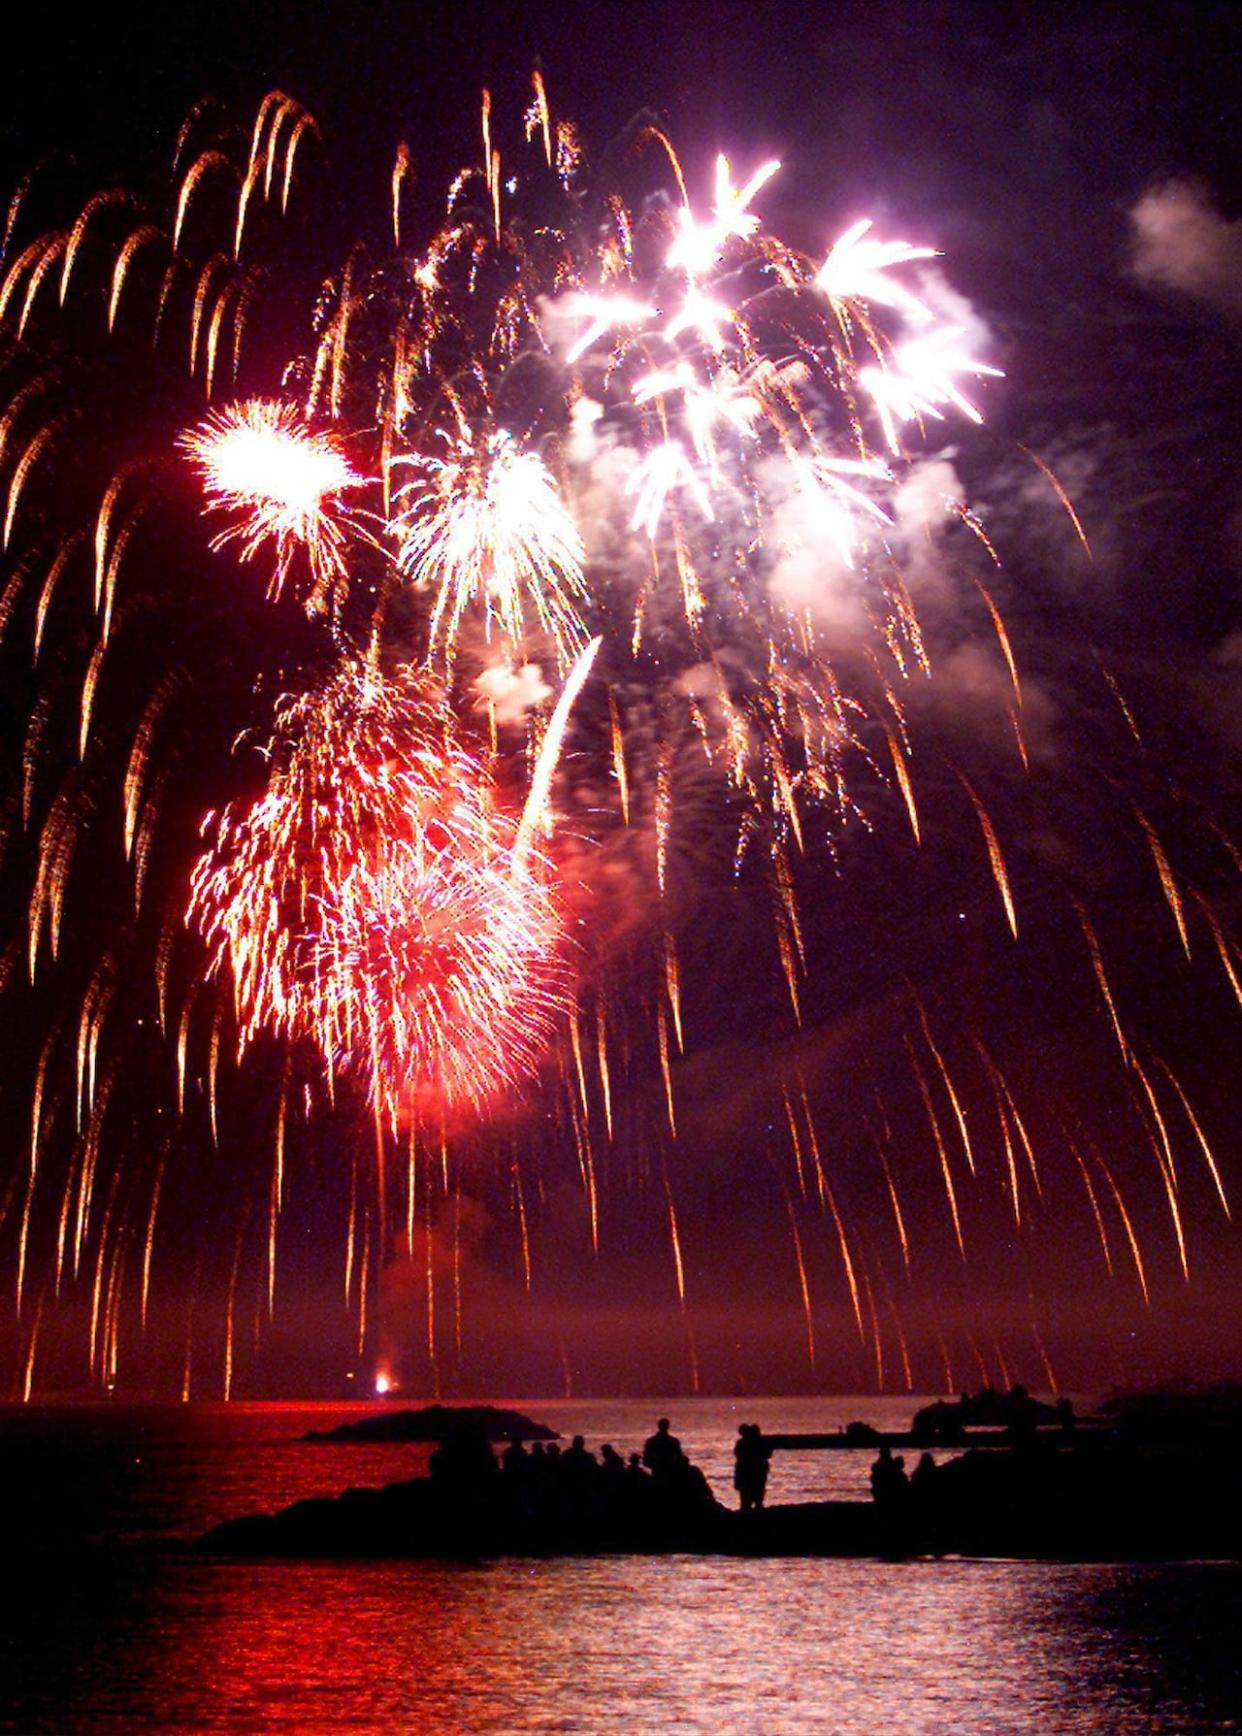 Torontonians can take in the annual Victoria Day fireworks display at Ashbridges Bay Park, starting at 10 p.m. on Monday.  (Frank Gunn/Canadian Press - image credit)